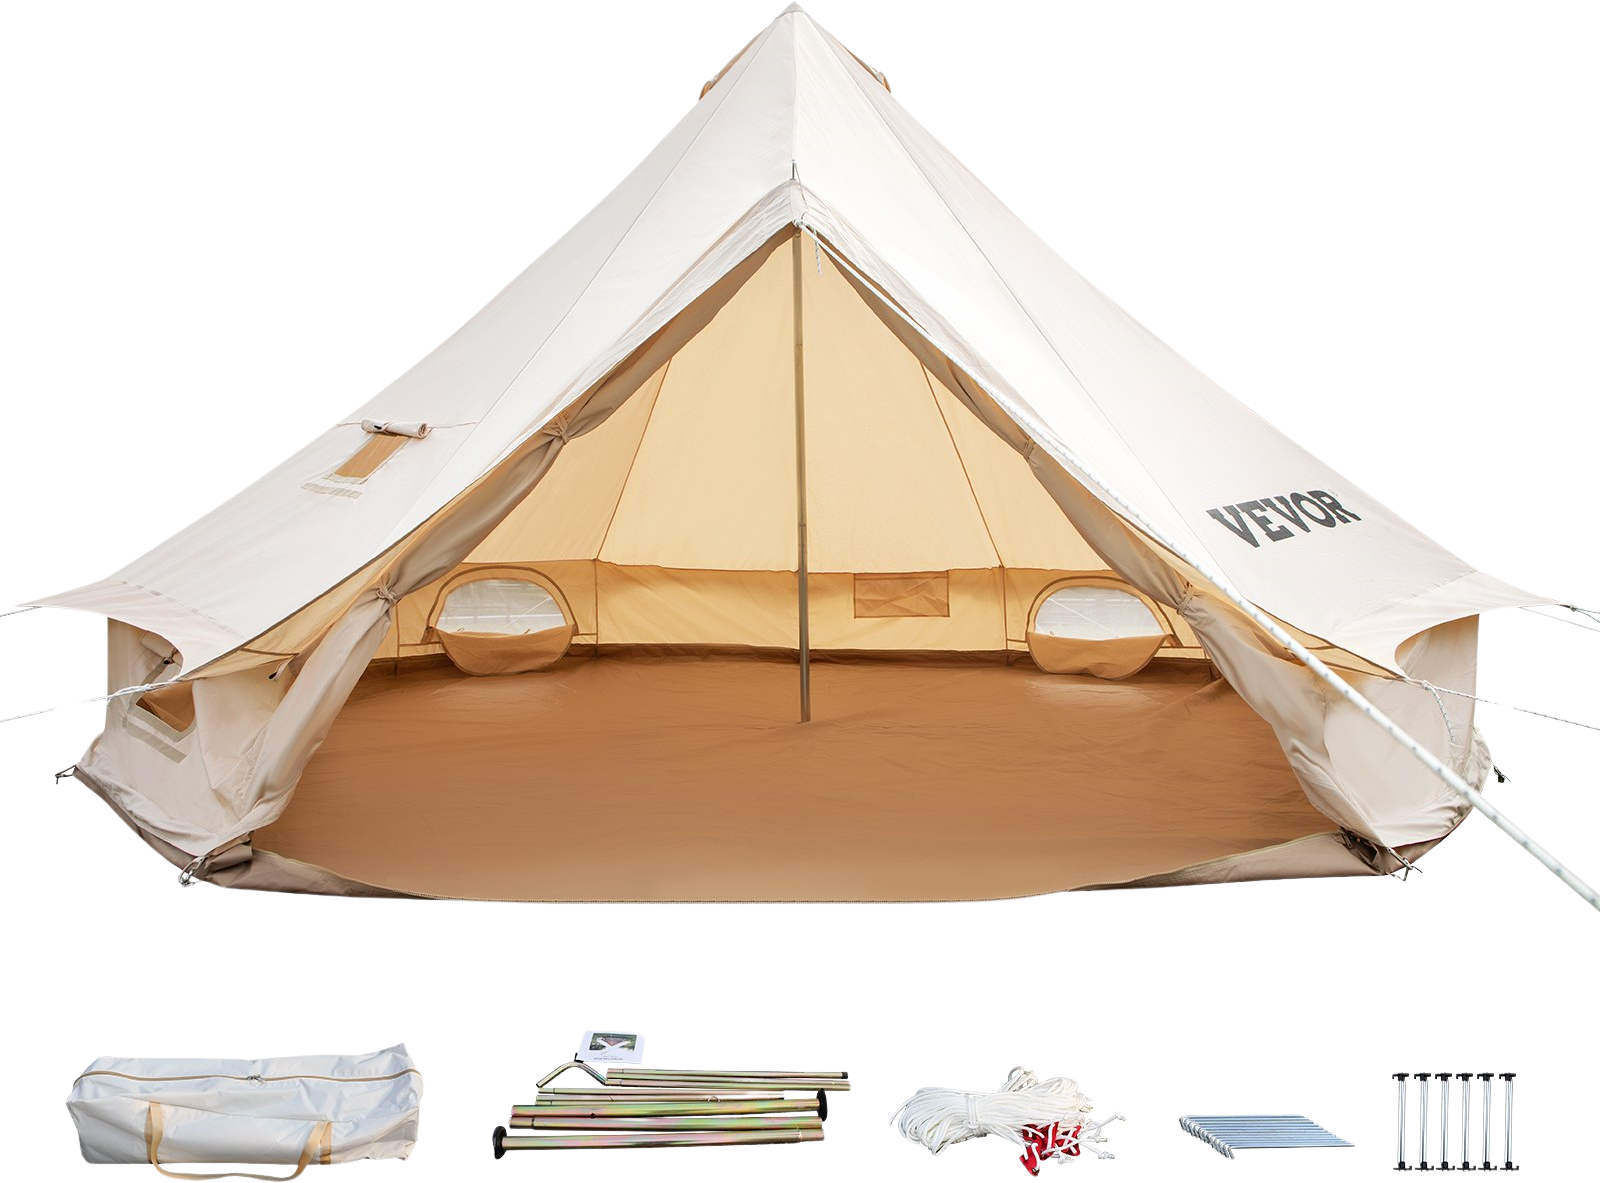 Vevor Bell Tent 23 ft/7m Yurt Cotton Canvas Waterproof With Stove Jack For 12 Or More People 4 Seasons New